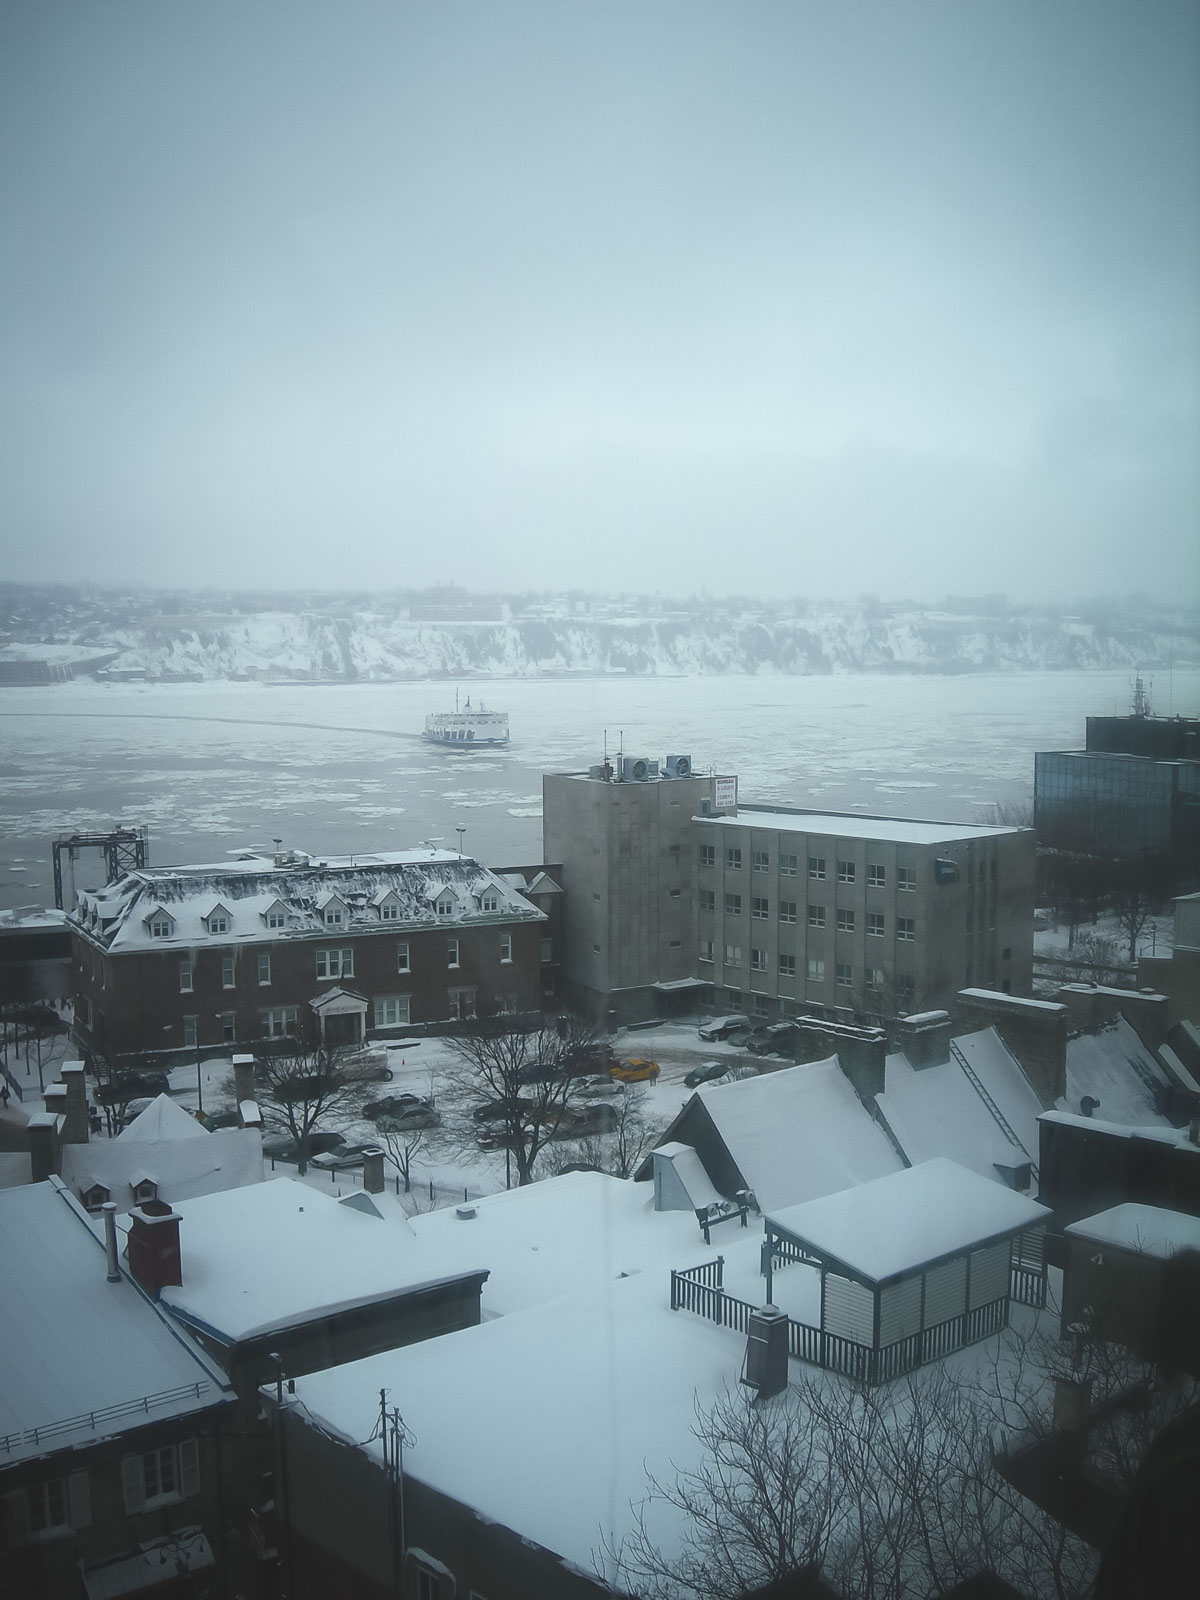 Saint Lawrence River from Quebec City